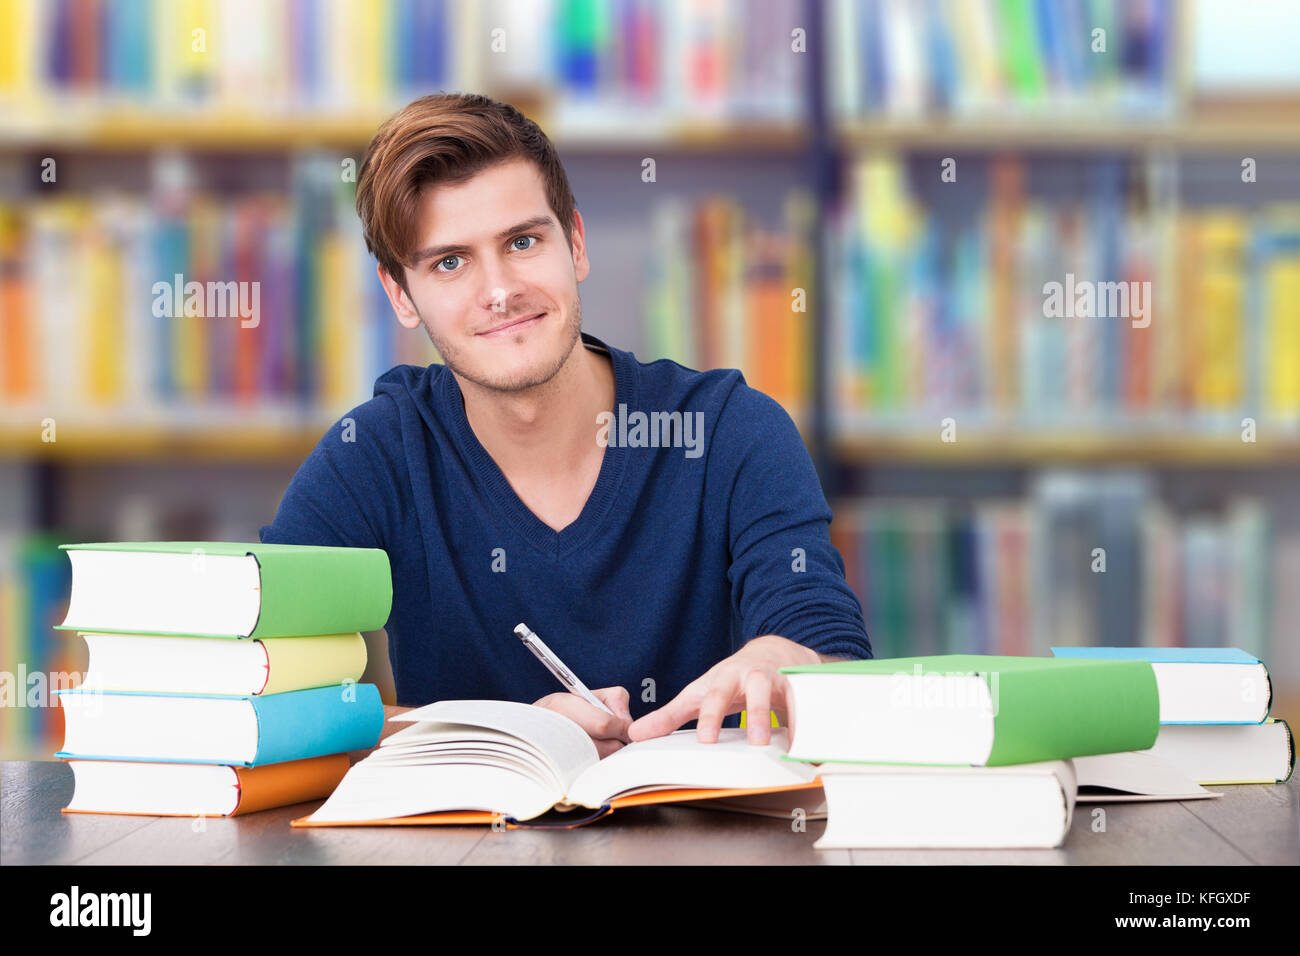 Portrait of smiling male college student studying at table in library Stock Photo